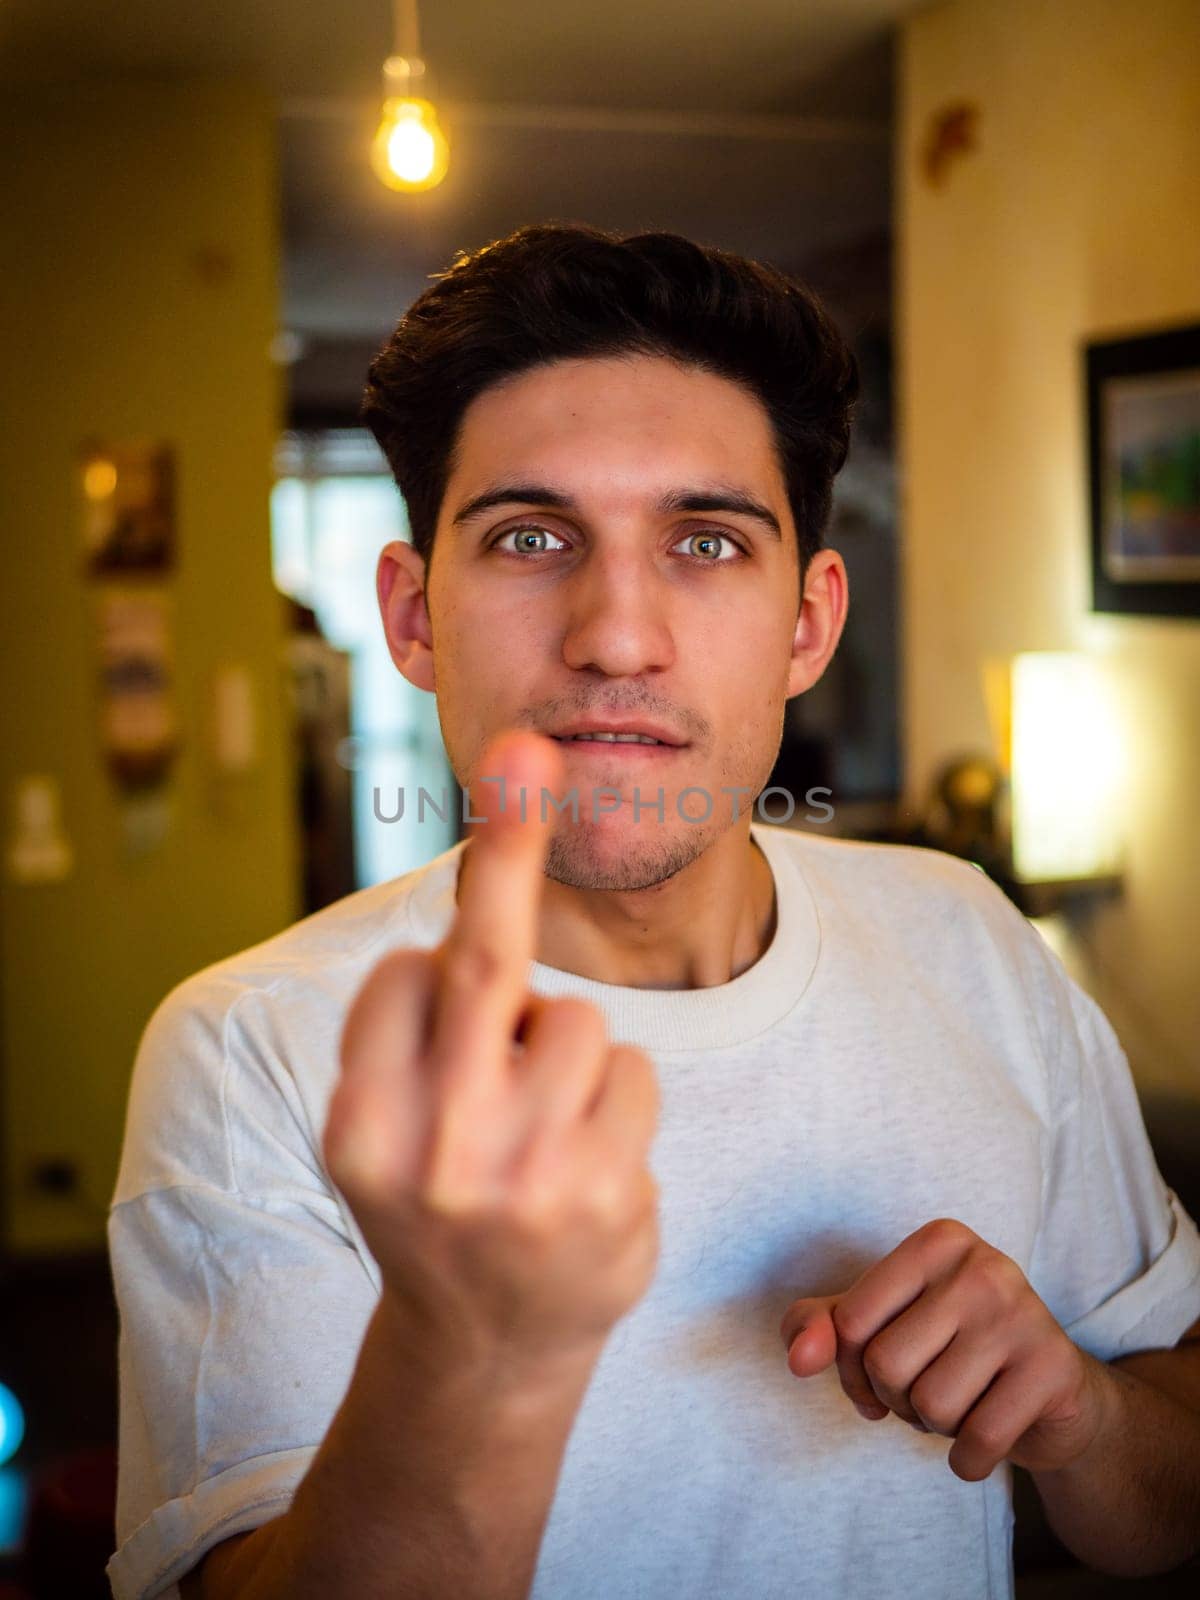 Young man doing 'screw you' sign with middle finger looking at camera, indoor at home